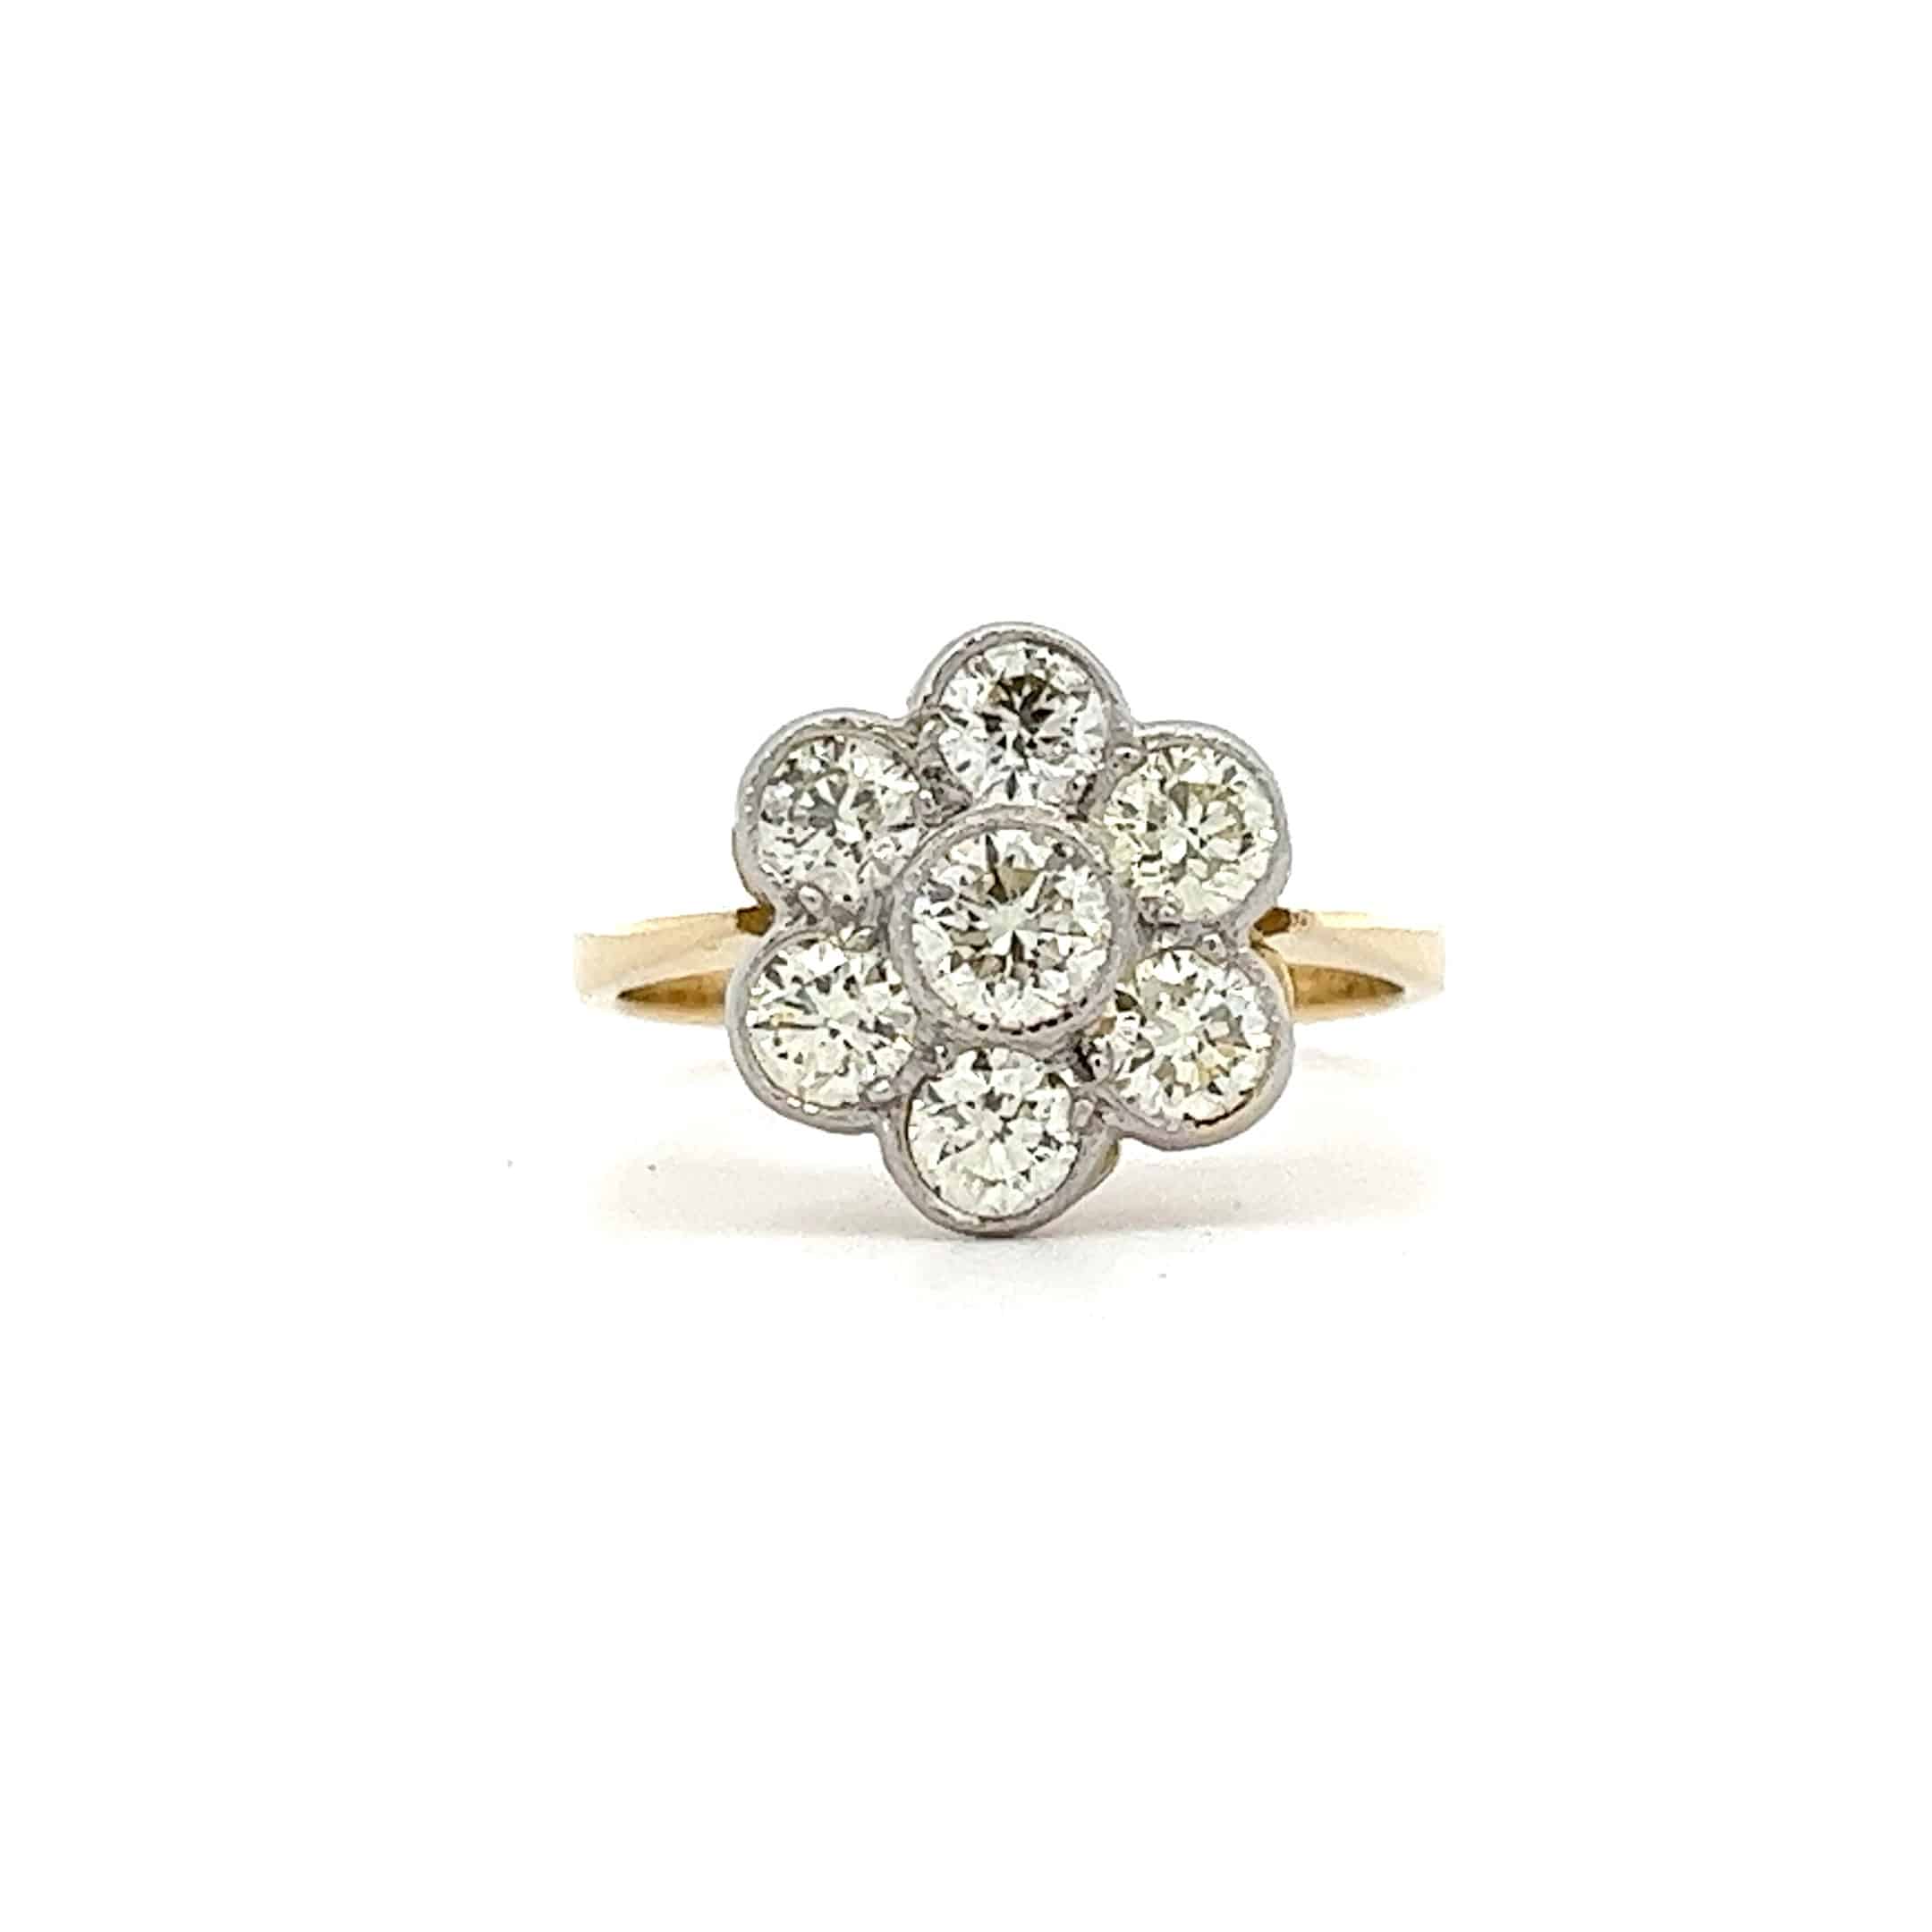 1.45ct Assessed Brilliant Cut Diamond Cluster Ring set in Platinum and 18ct Yellow Gold – Pre-owned